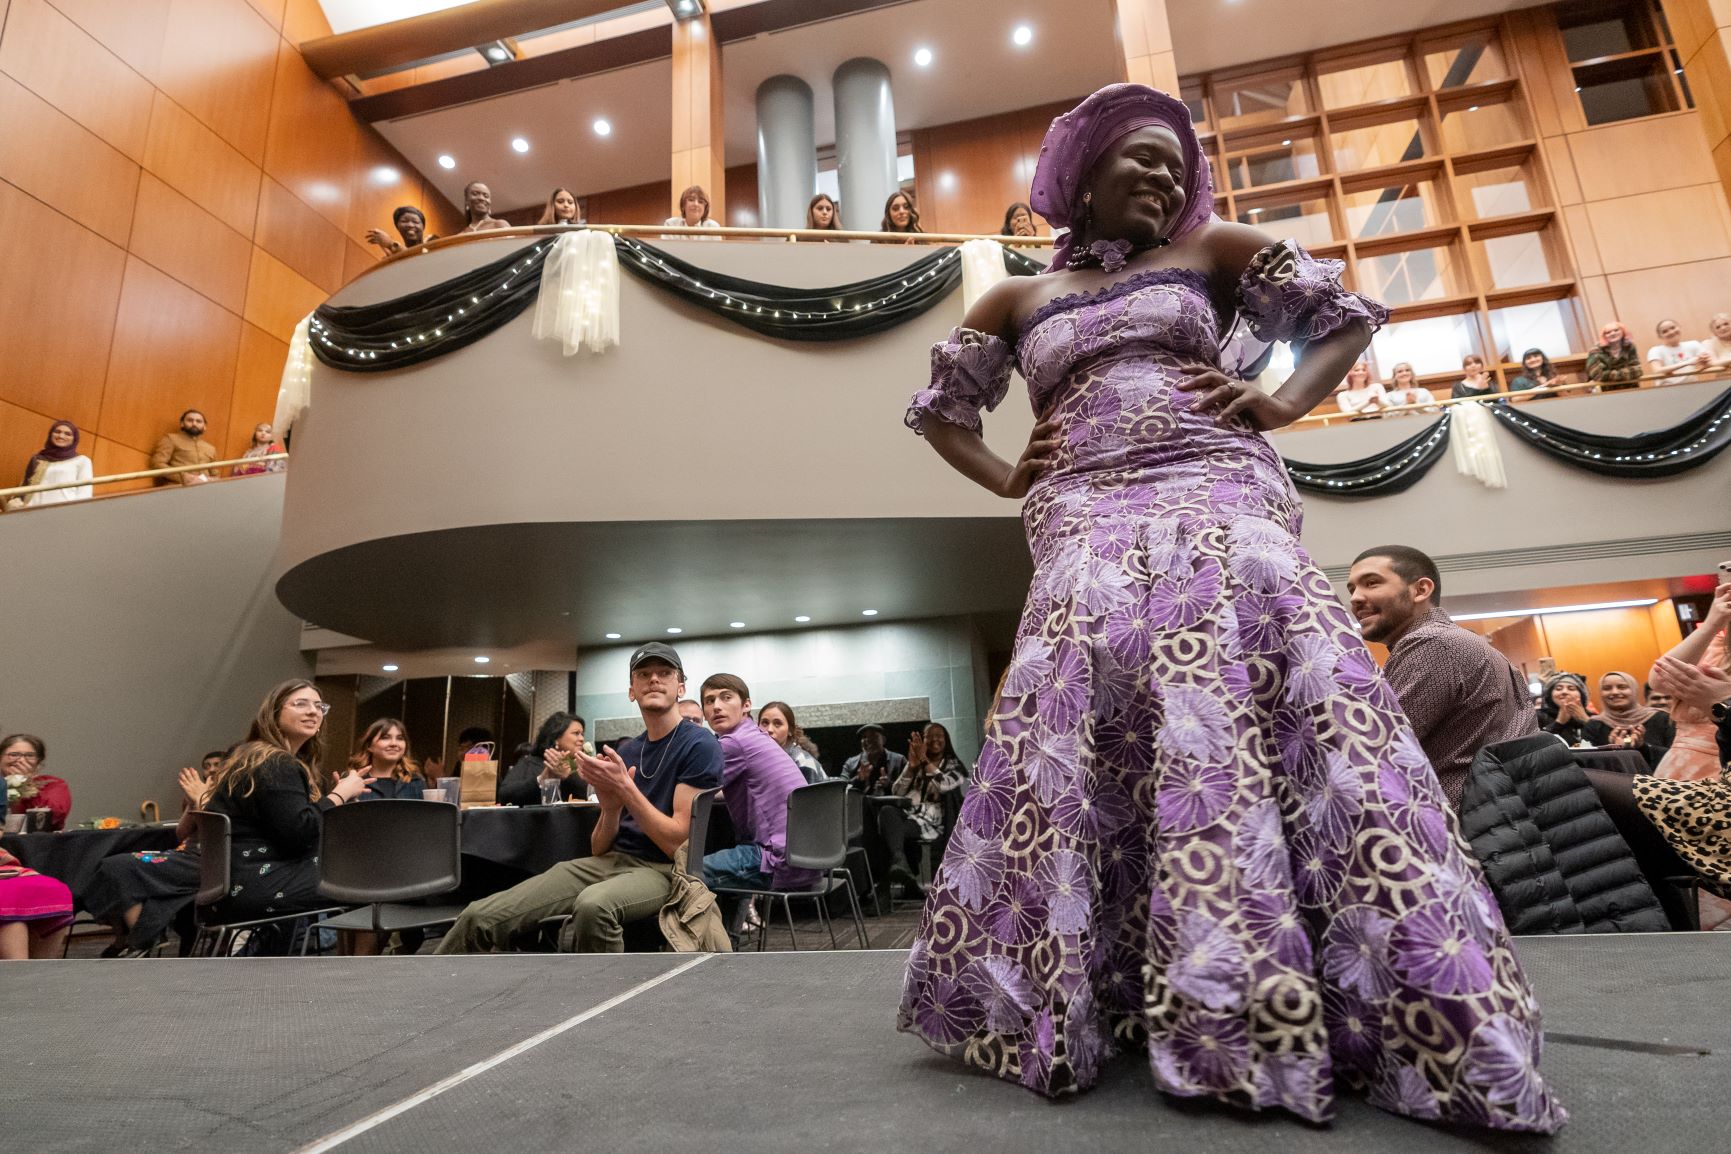 Hosted at the Wick Alumni Center, the highlight of Global Glam included 40 students modeling traditional clothing from their country as well as clothing from student designers and local retailers. // Jordan Opp, University Communication